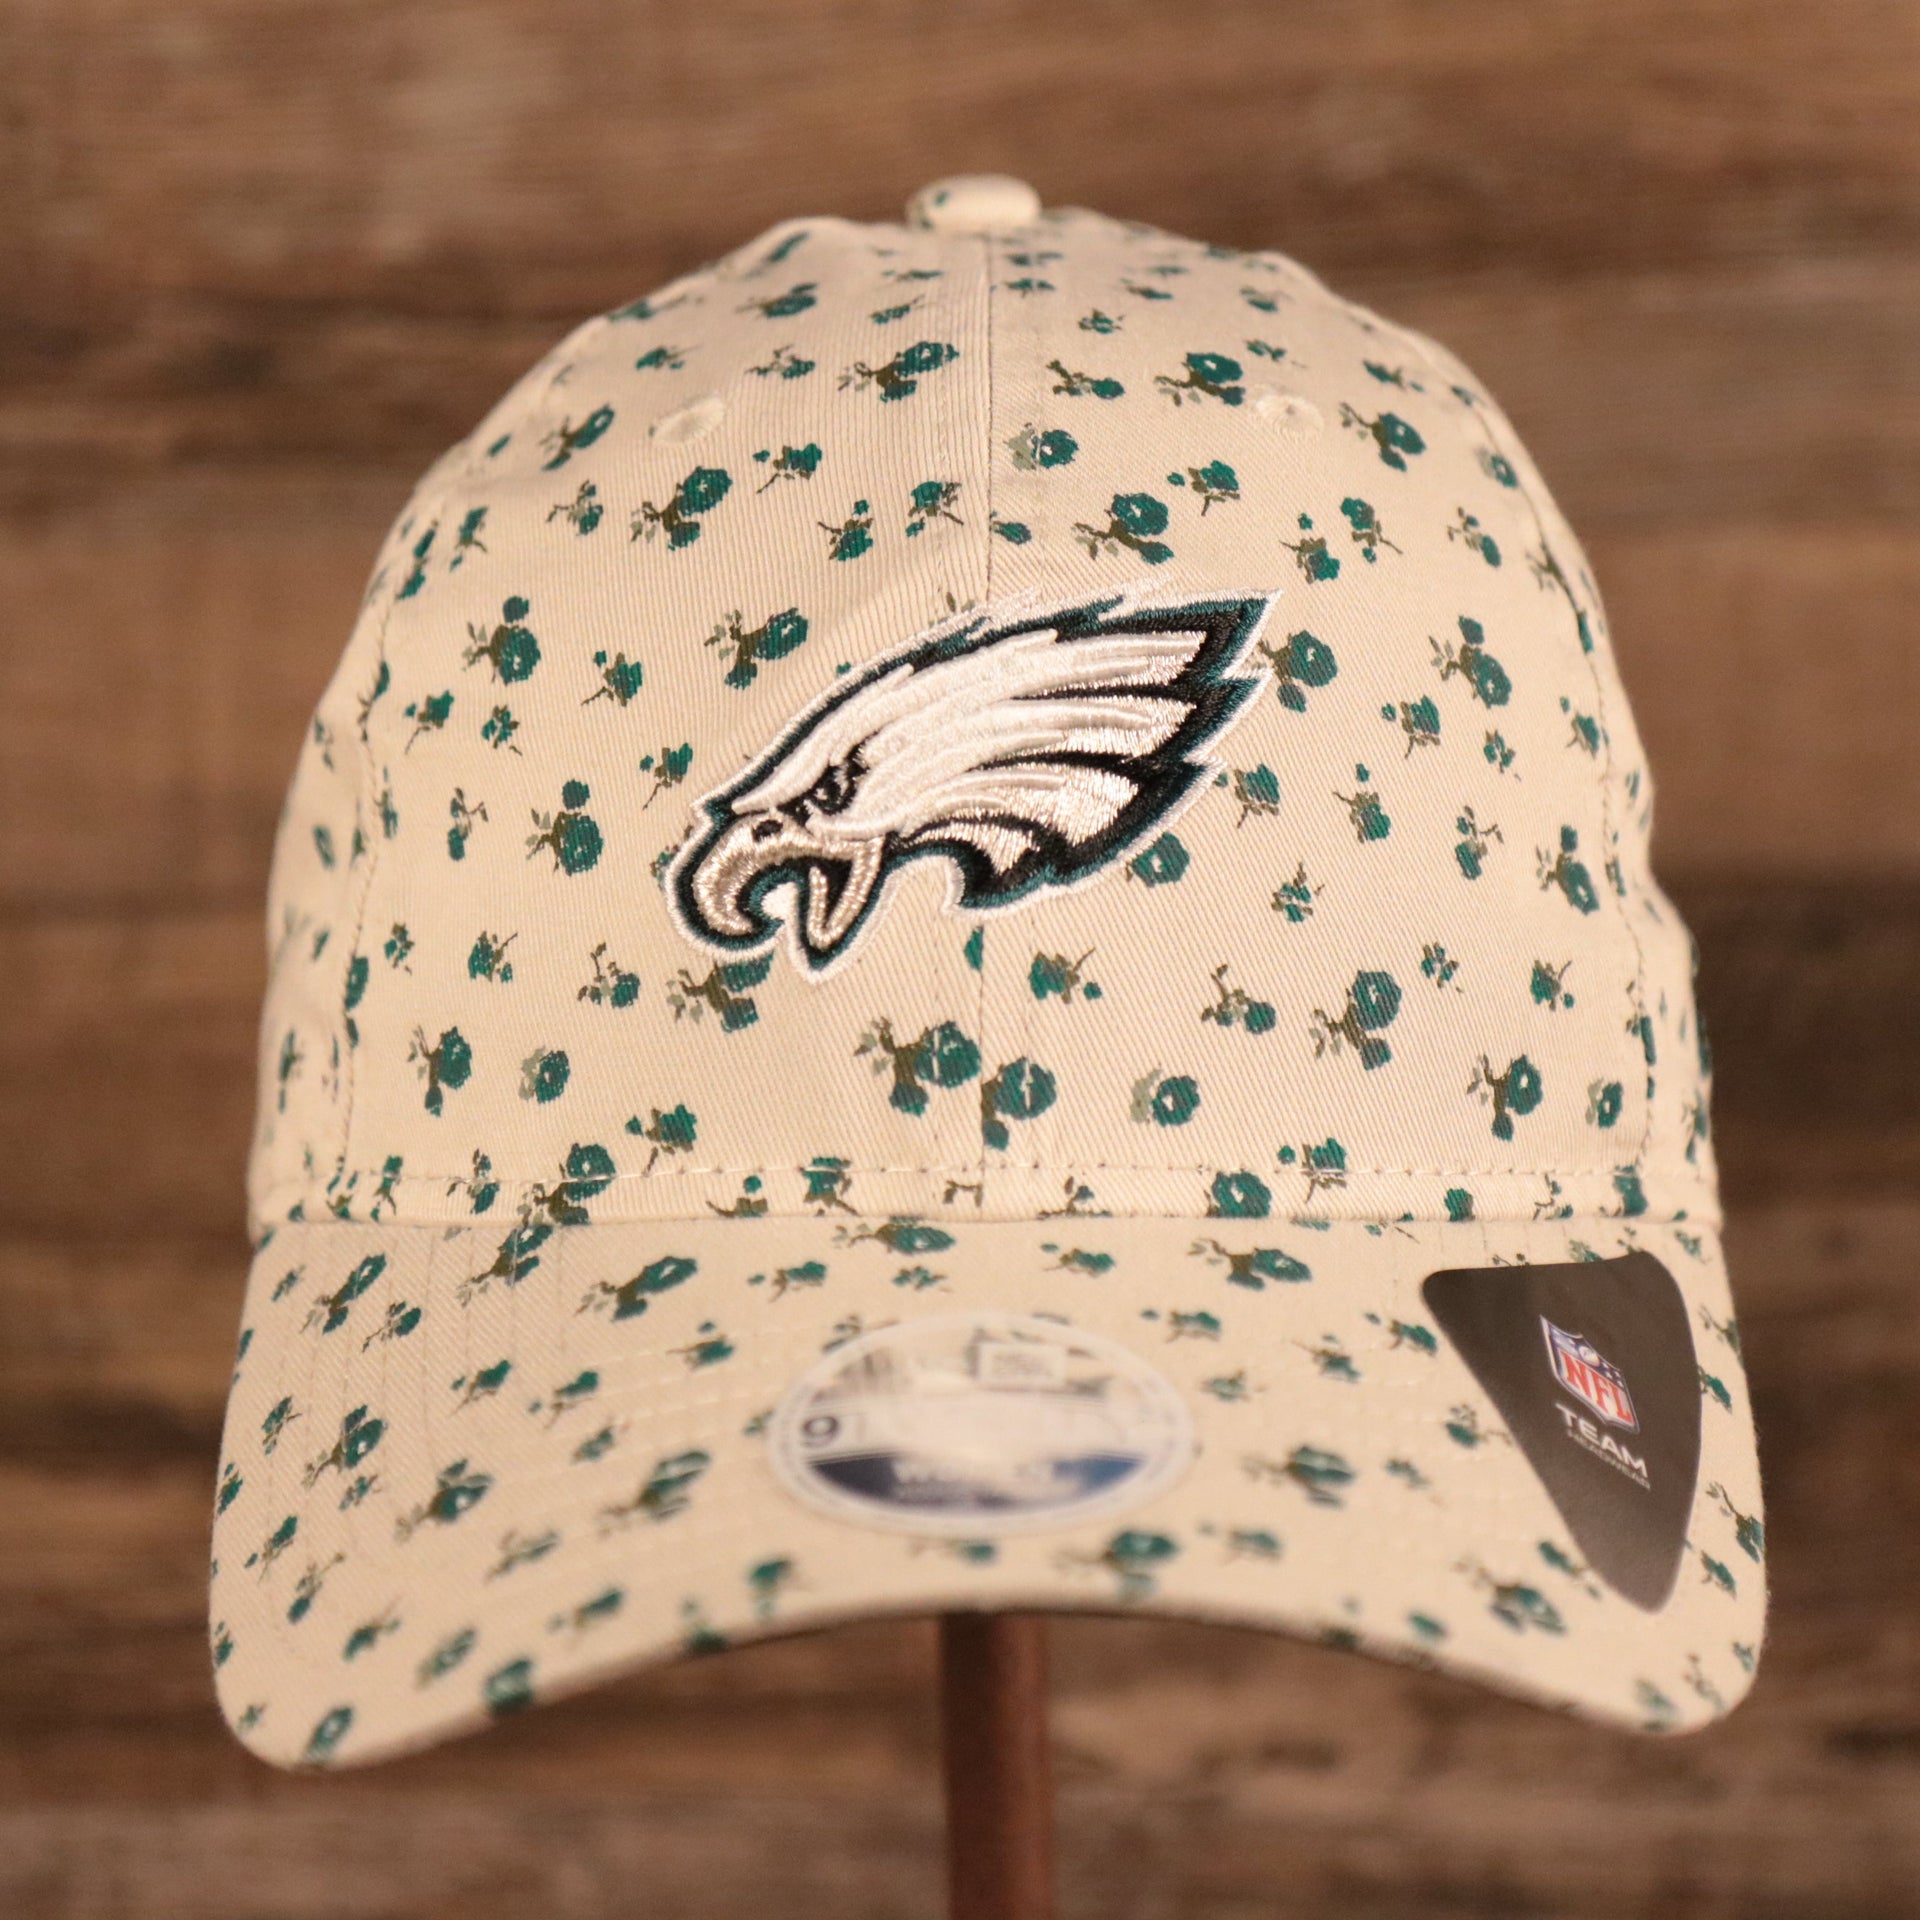 The Philadelphia Eagles logo on the front side of the New Era youth micro floral baseball 9twenty dad hat.